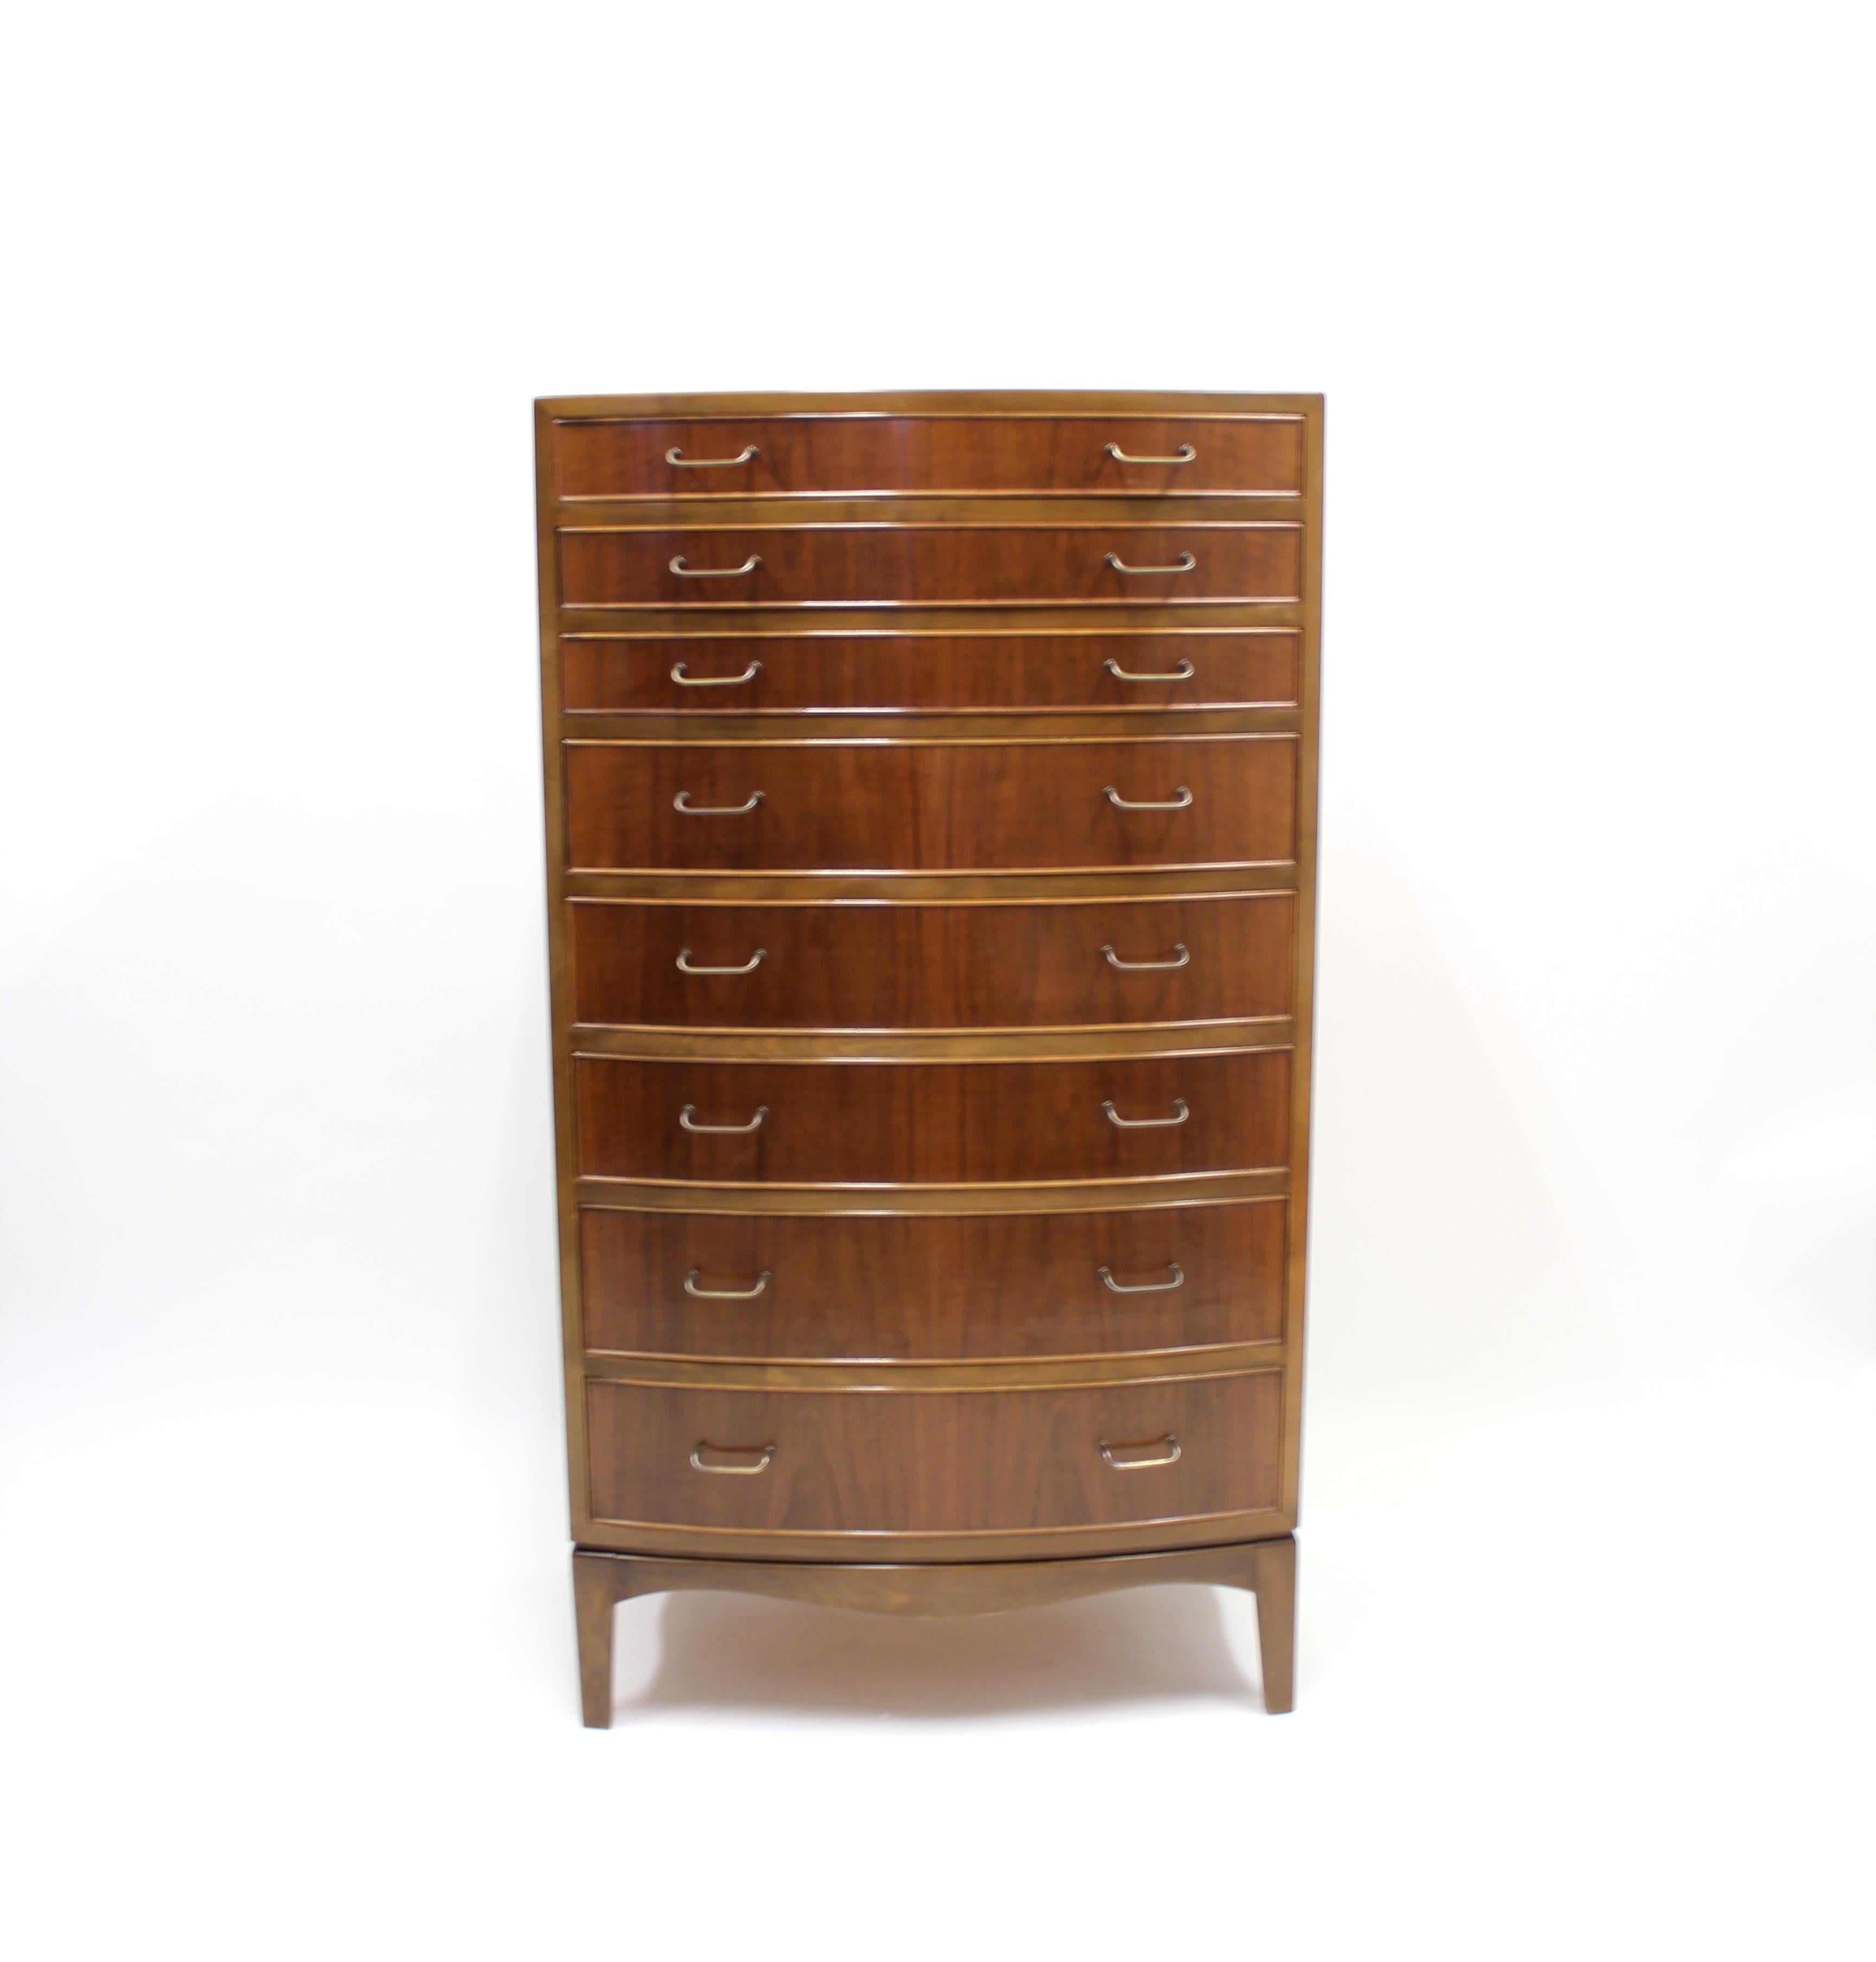 Scandinavian Modern Chest of Drawers by Ole Wanscher for A.J. Iversen, 1940s For Sale